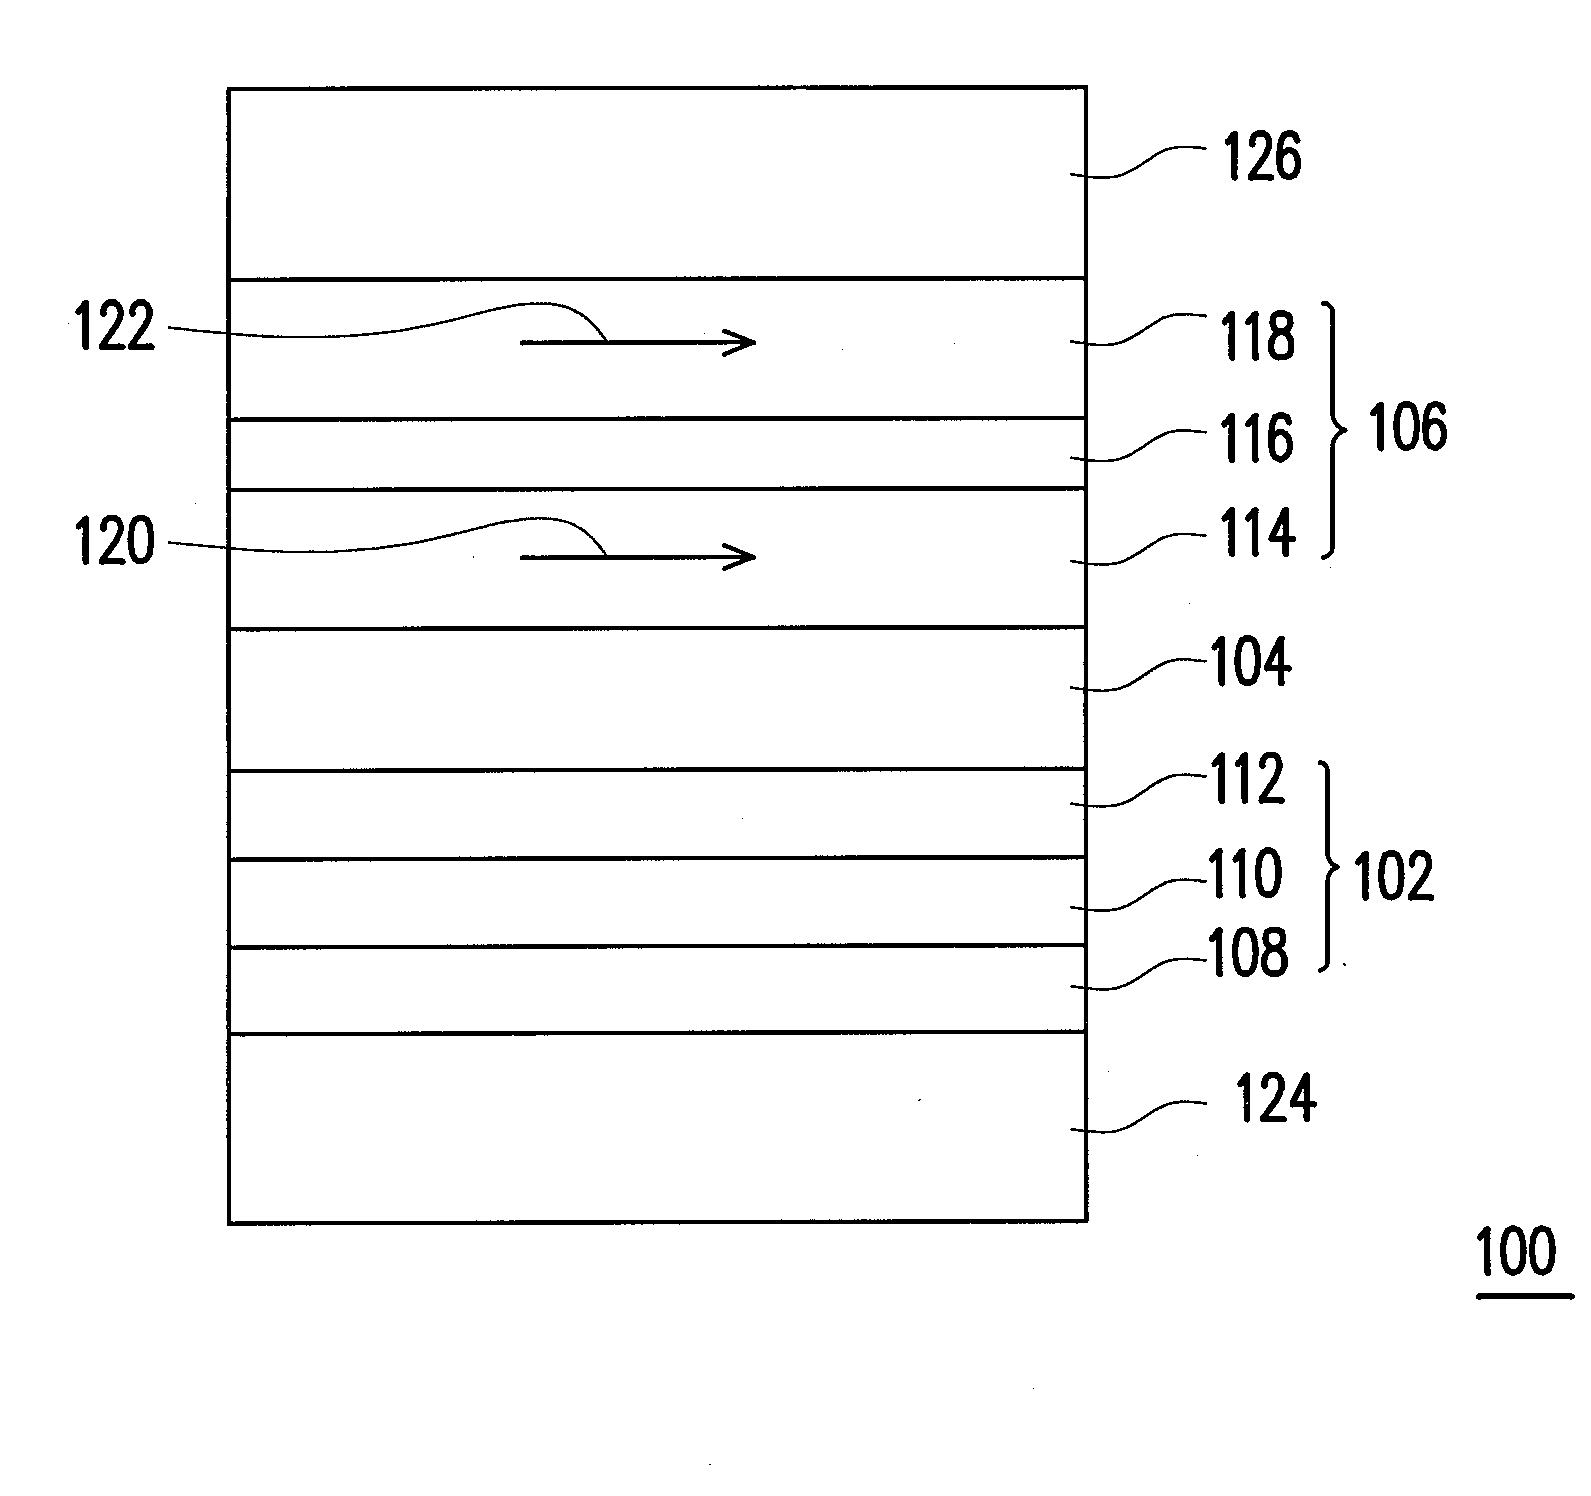 Magnetic memory element utilizing spin transfer switching